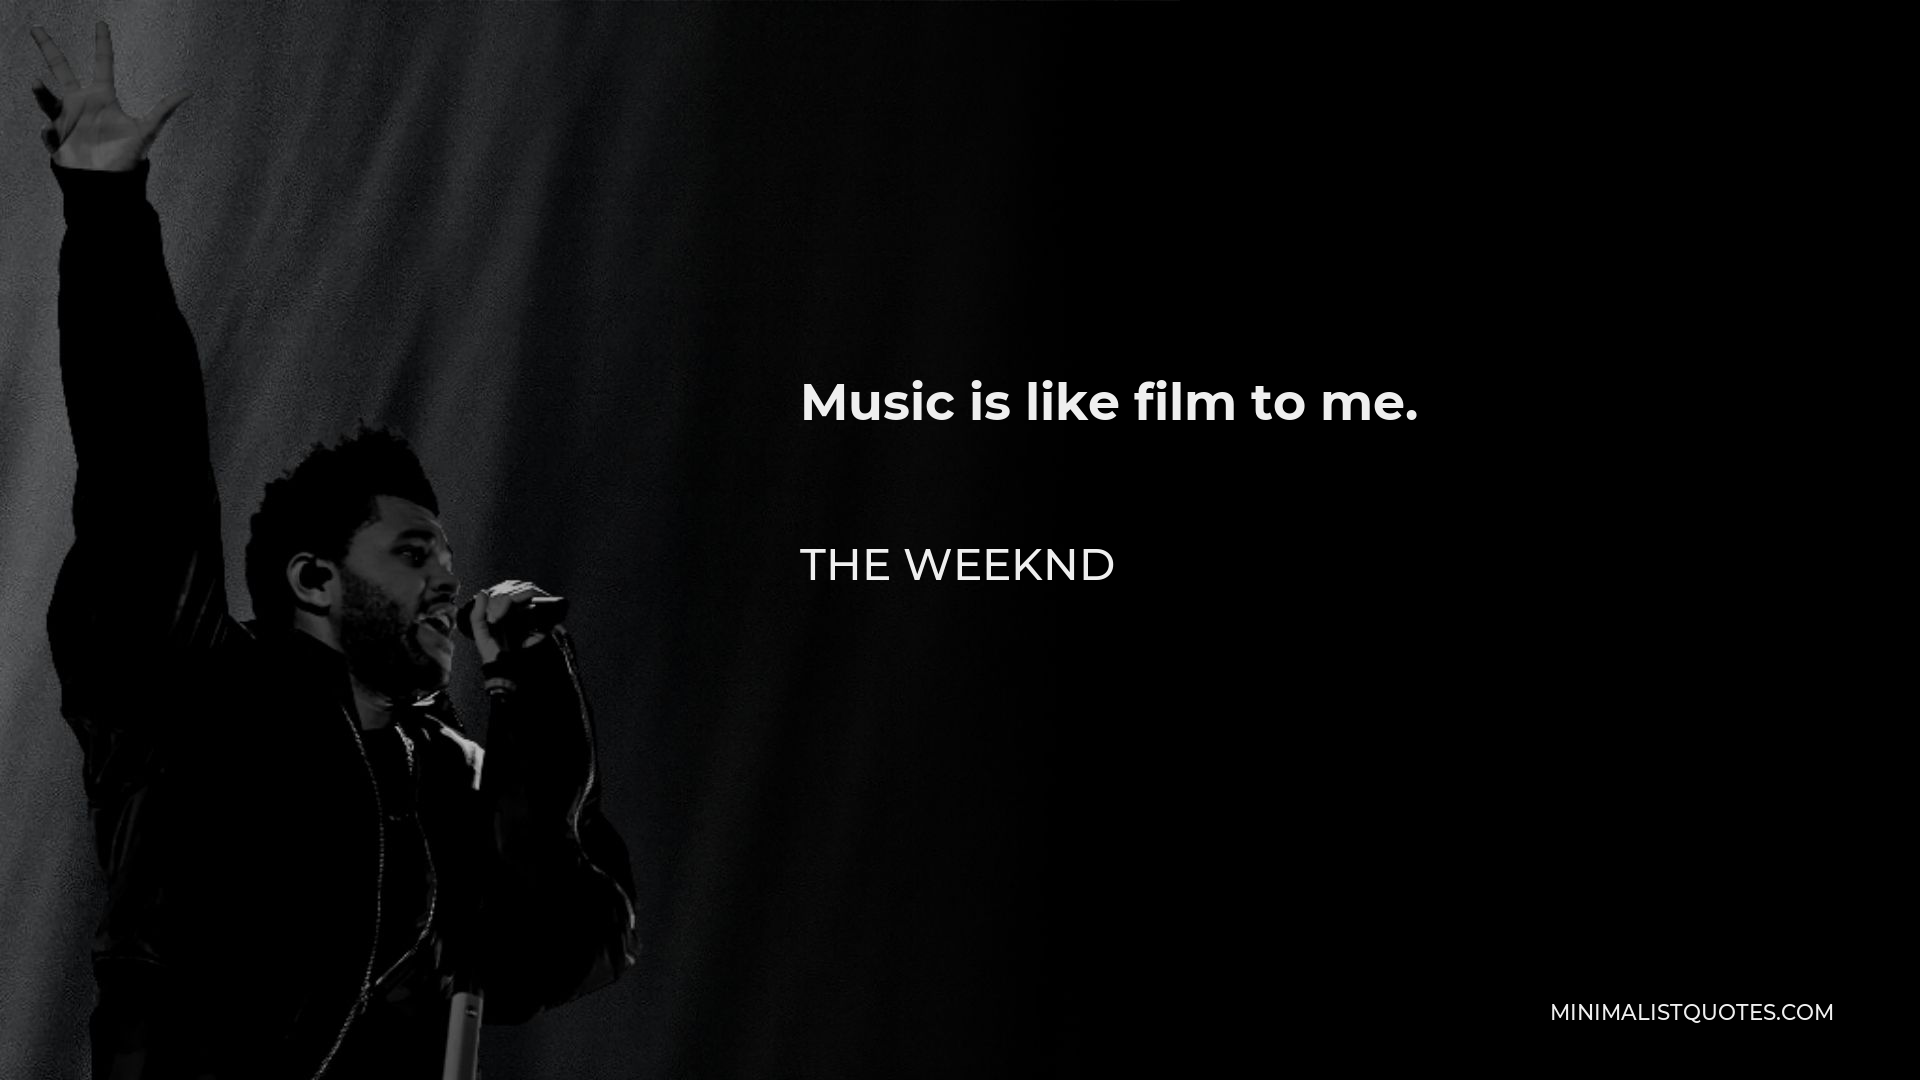 The Weeknd Quote - Music is like film to me.